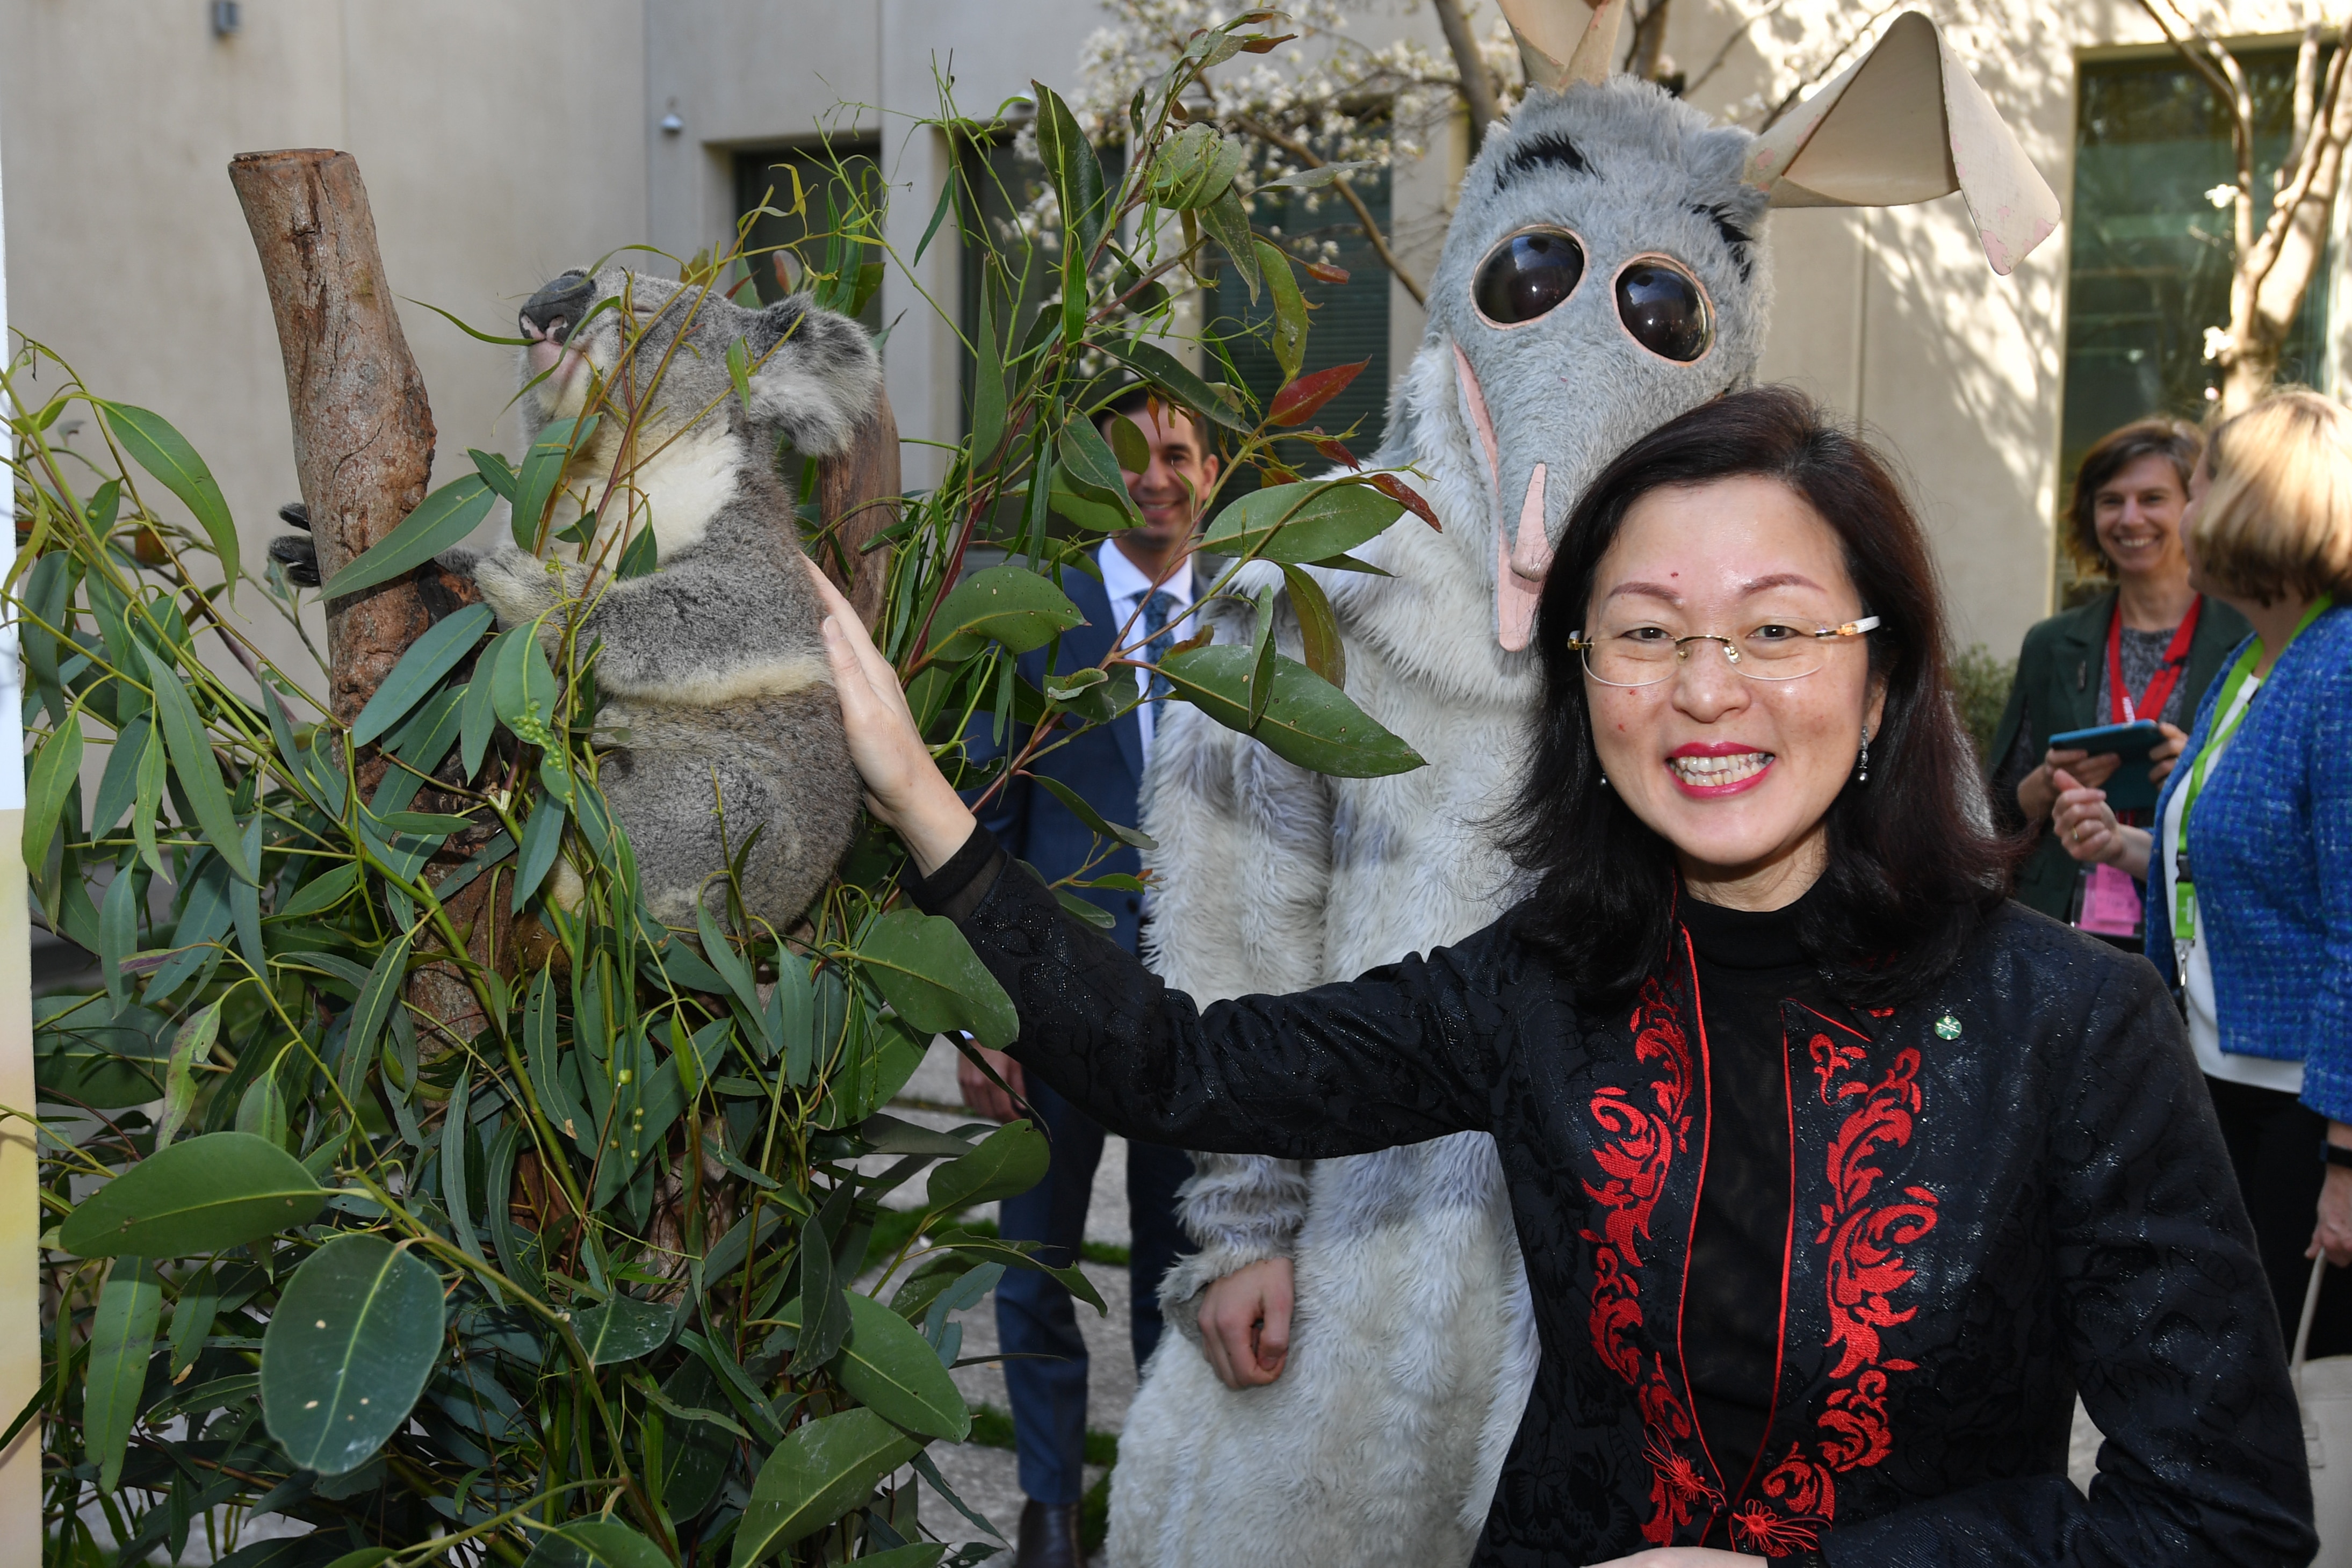 Liberal member for Chisholm Gladys Liu pats a koala during a National Threatened Species Day event at Parliament House in Canberra, Tuesday, September 10, 2019. (AAP Image/Mick Tsikas) NO ARCHIVING